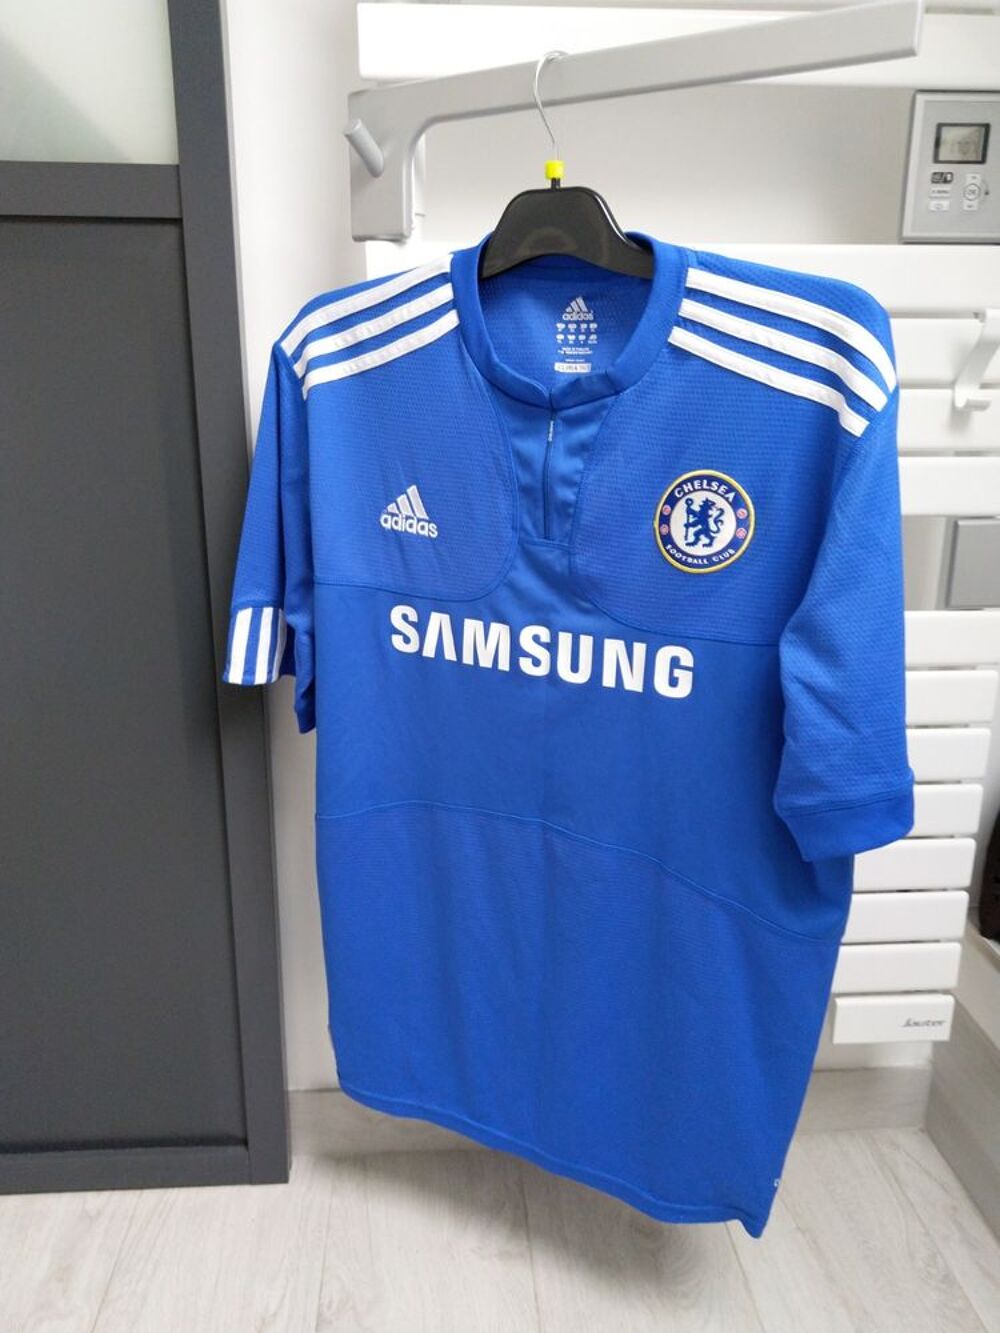 Maillot Adidas Chelsea (2009/2010)
Vtements